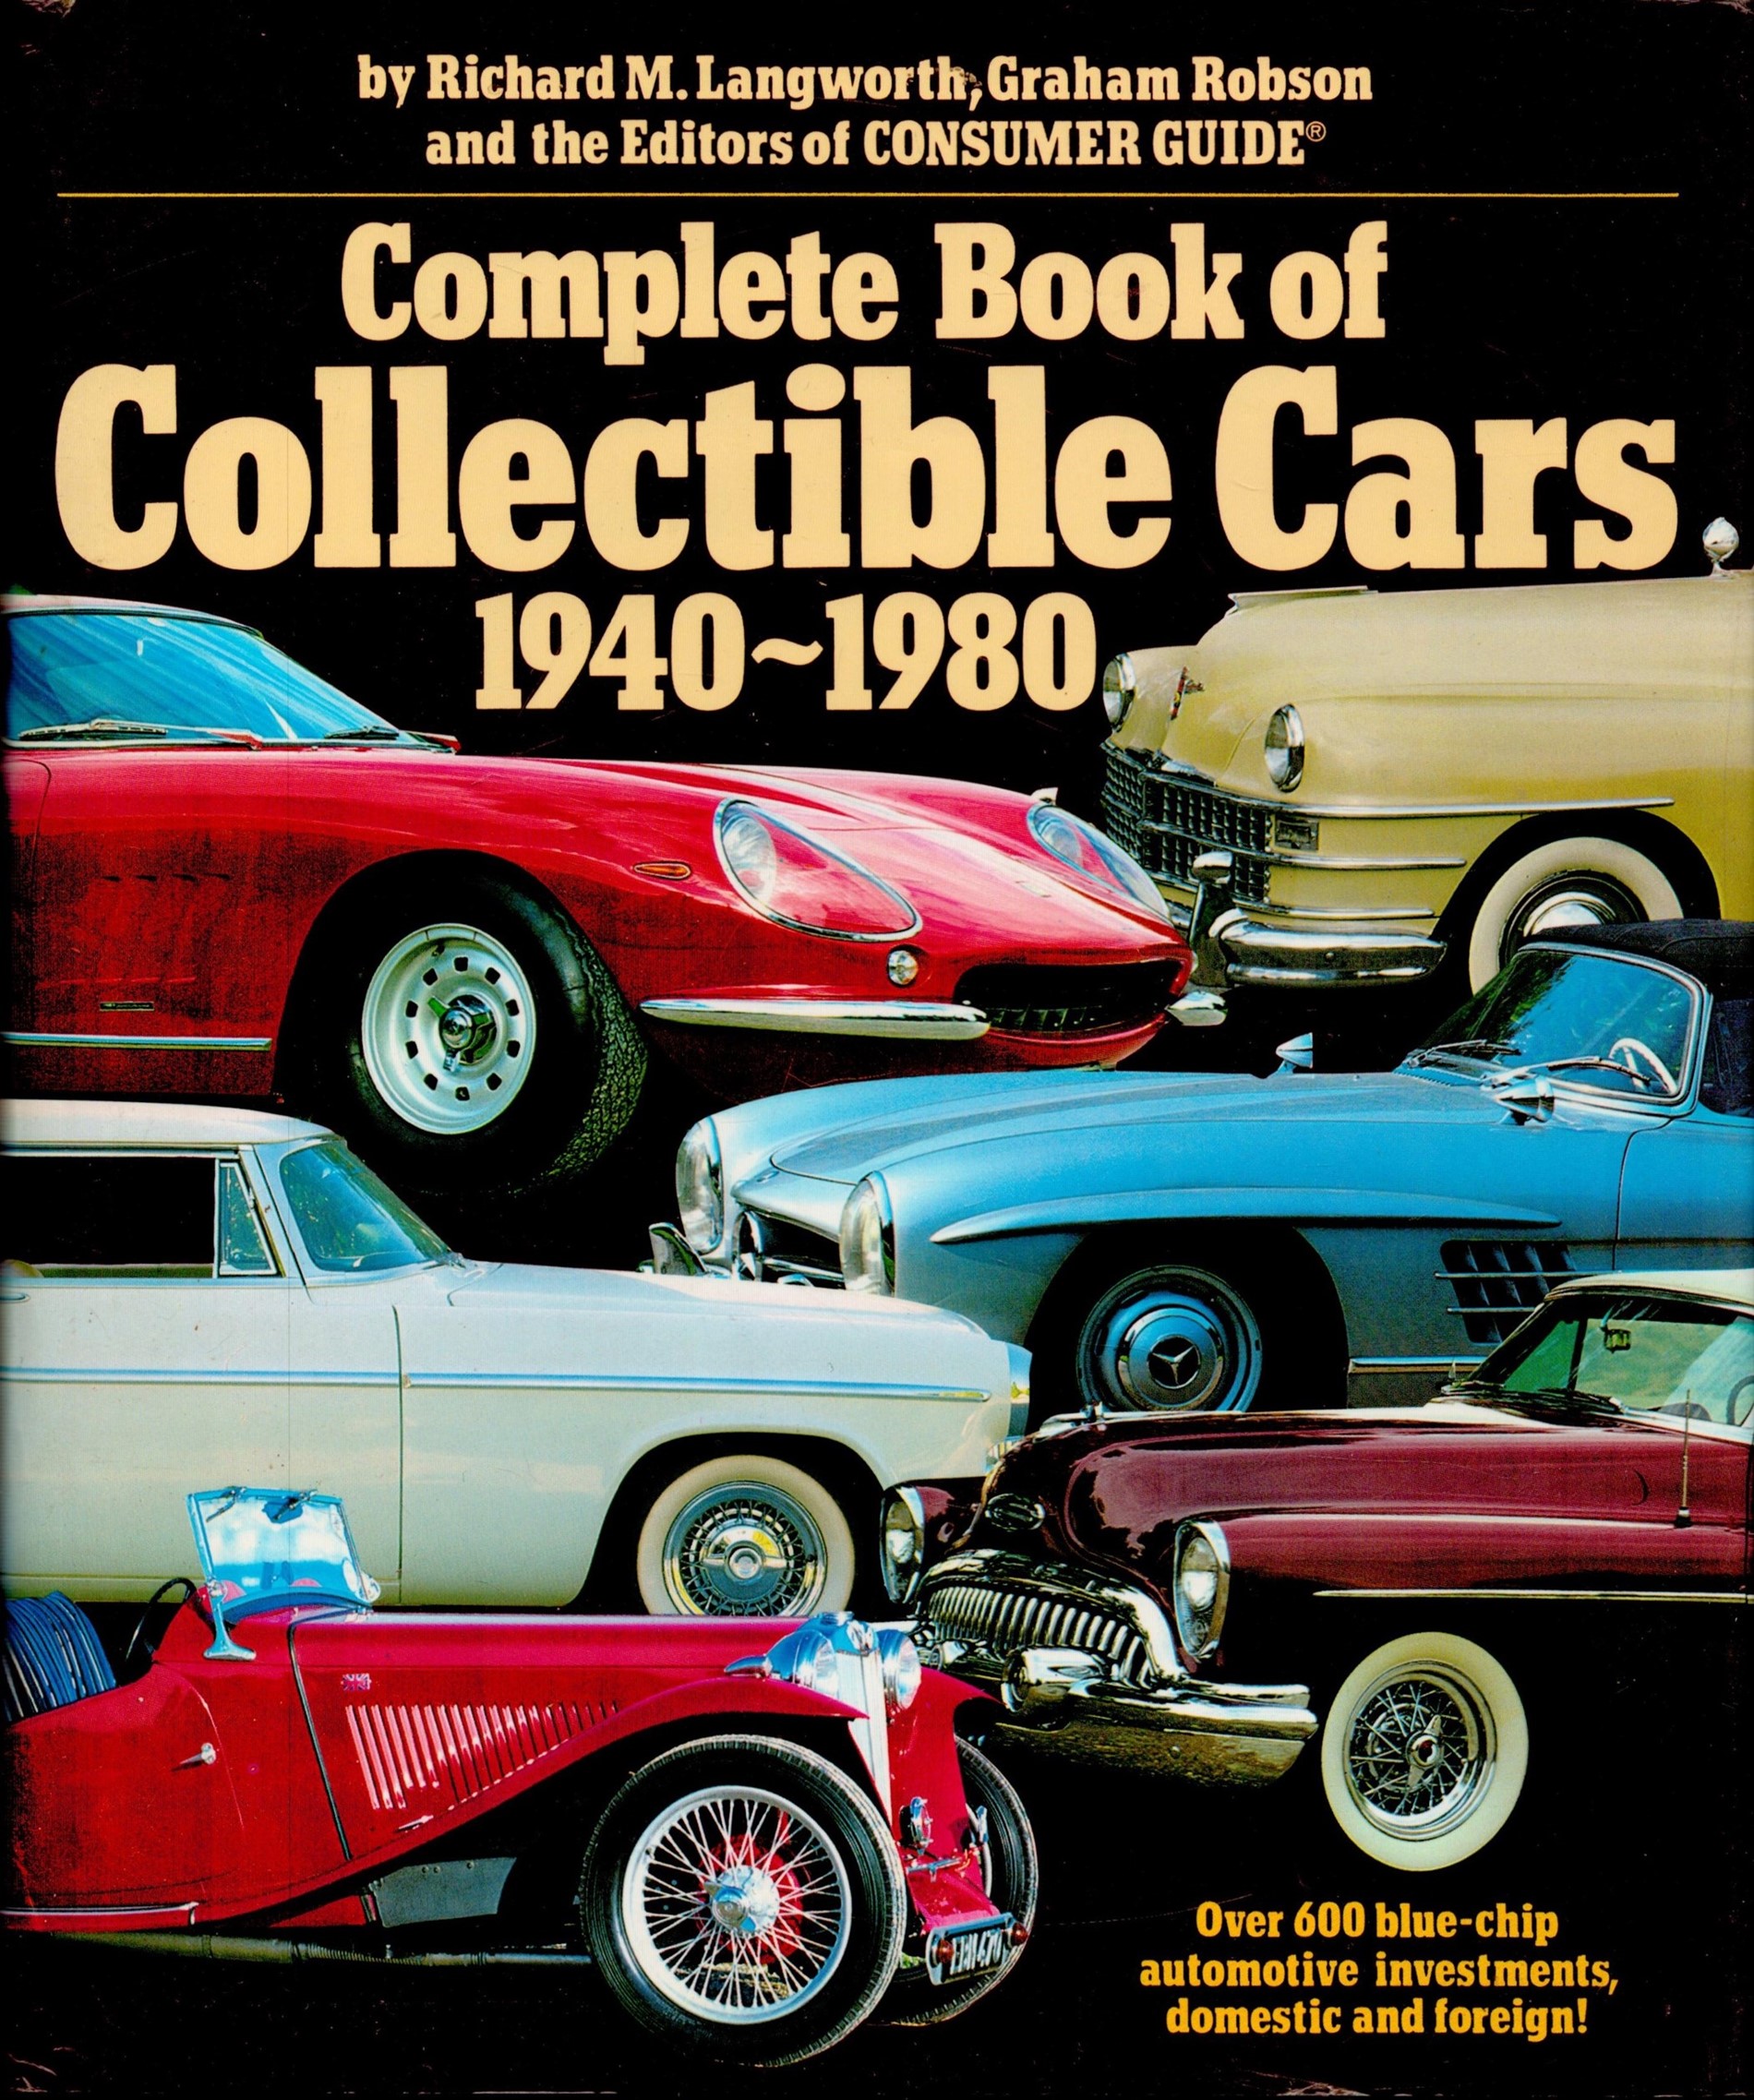 Complete Book of Collectable Cars 1940 1980 by R M Langworth and G Robson 1982 First Edition